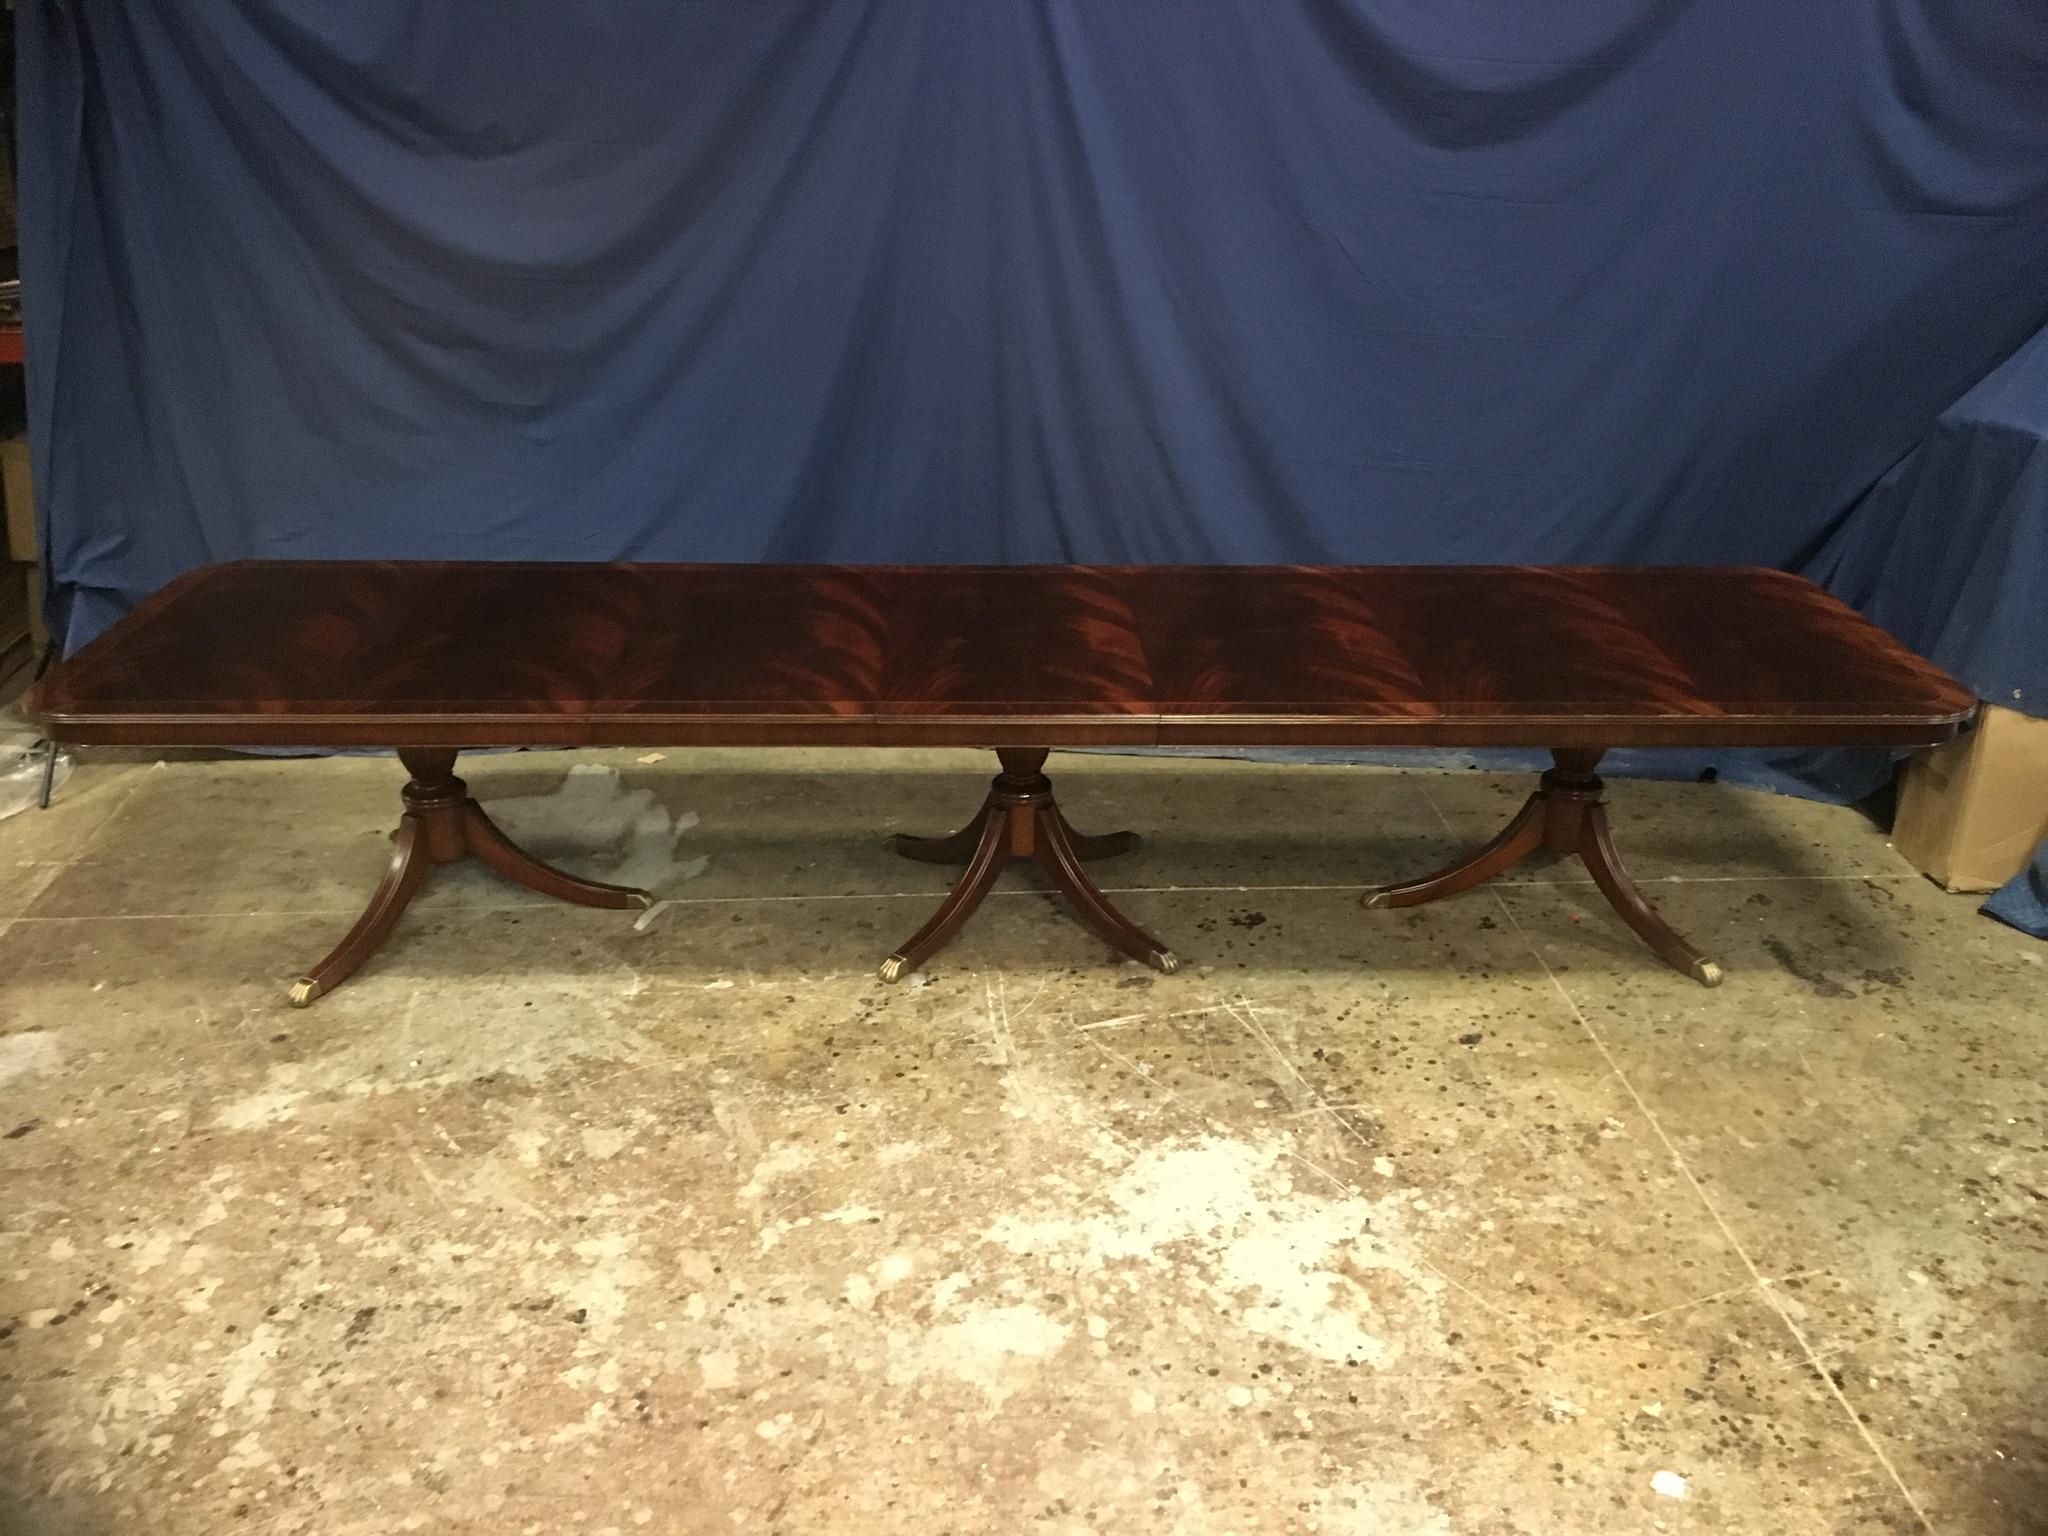 This is a made-to-order large traditional mahogany banquet/dining table made in the Leighton Hall shop. It features a field of slip-matched swirly crotch mahogany from west Africa with a contrasting border separated by an ebony and white maple Inlay